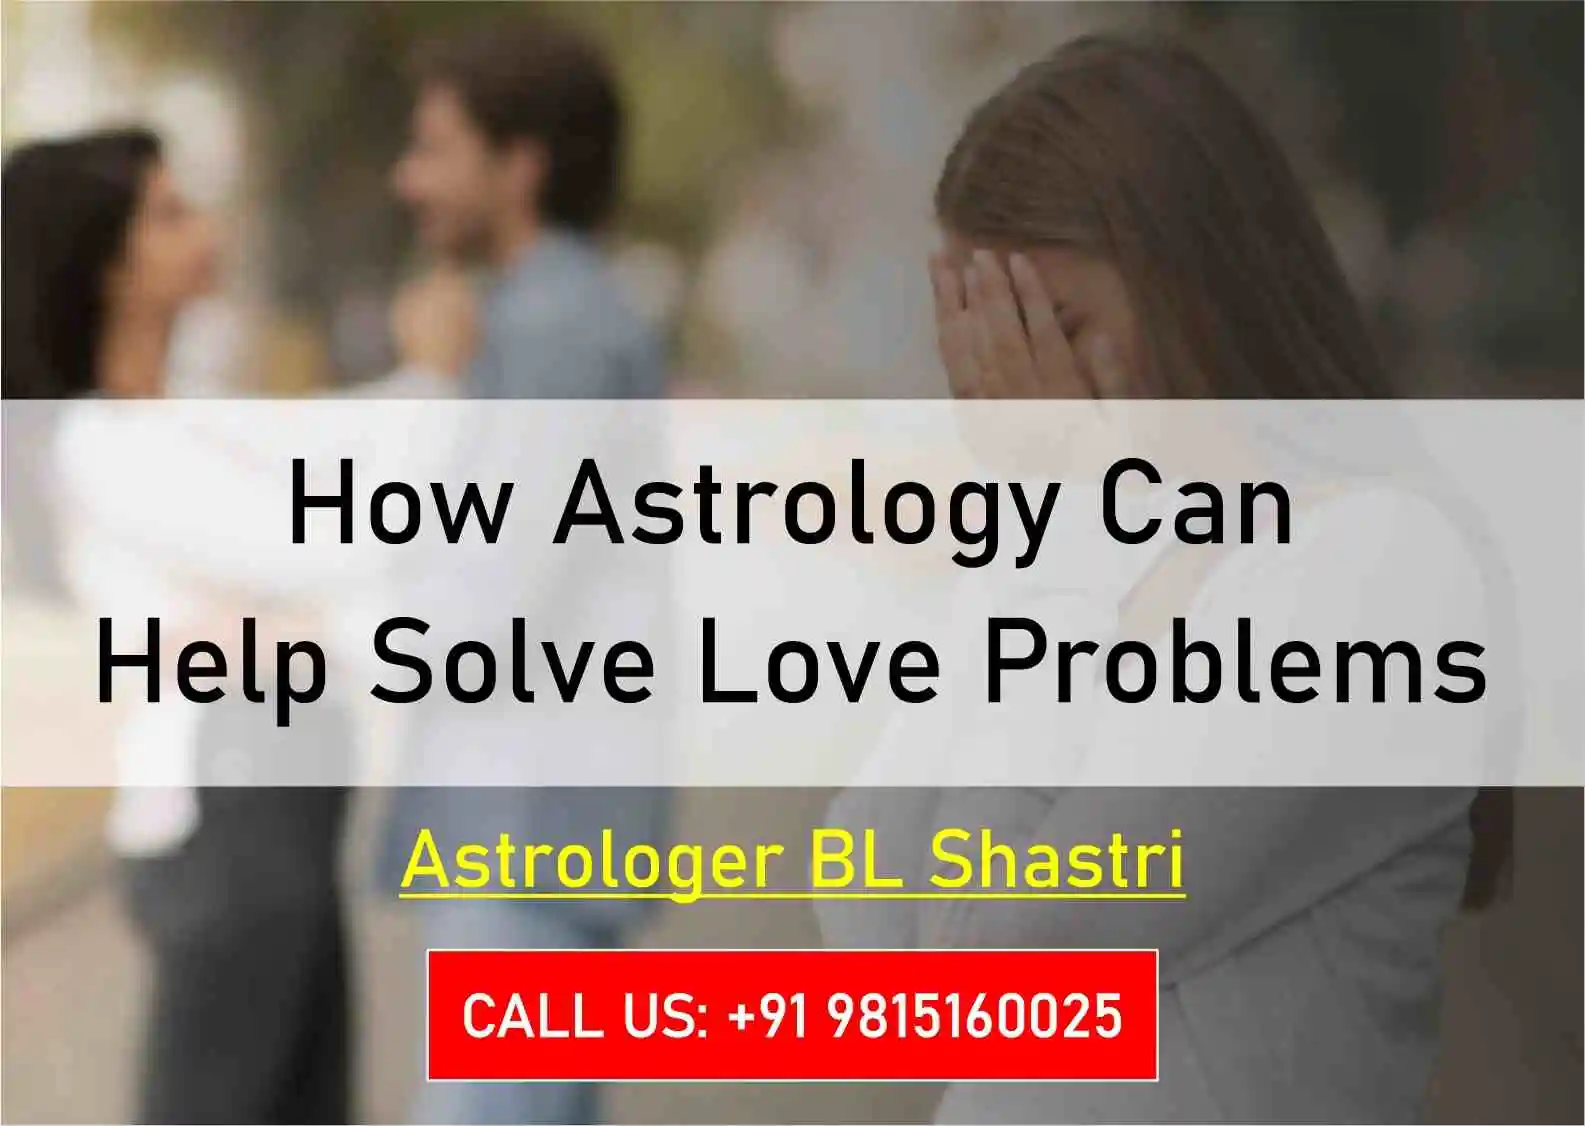 How Astrology Can Help Solve Love Problems